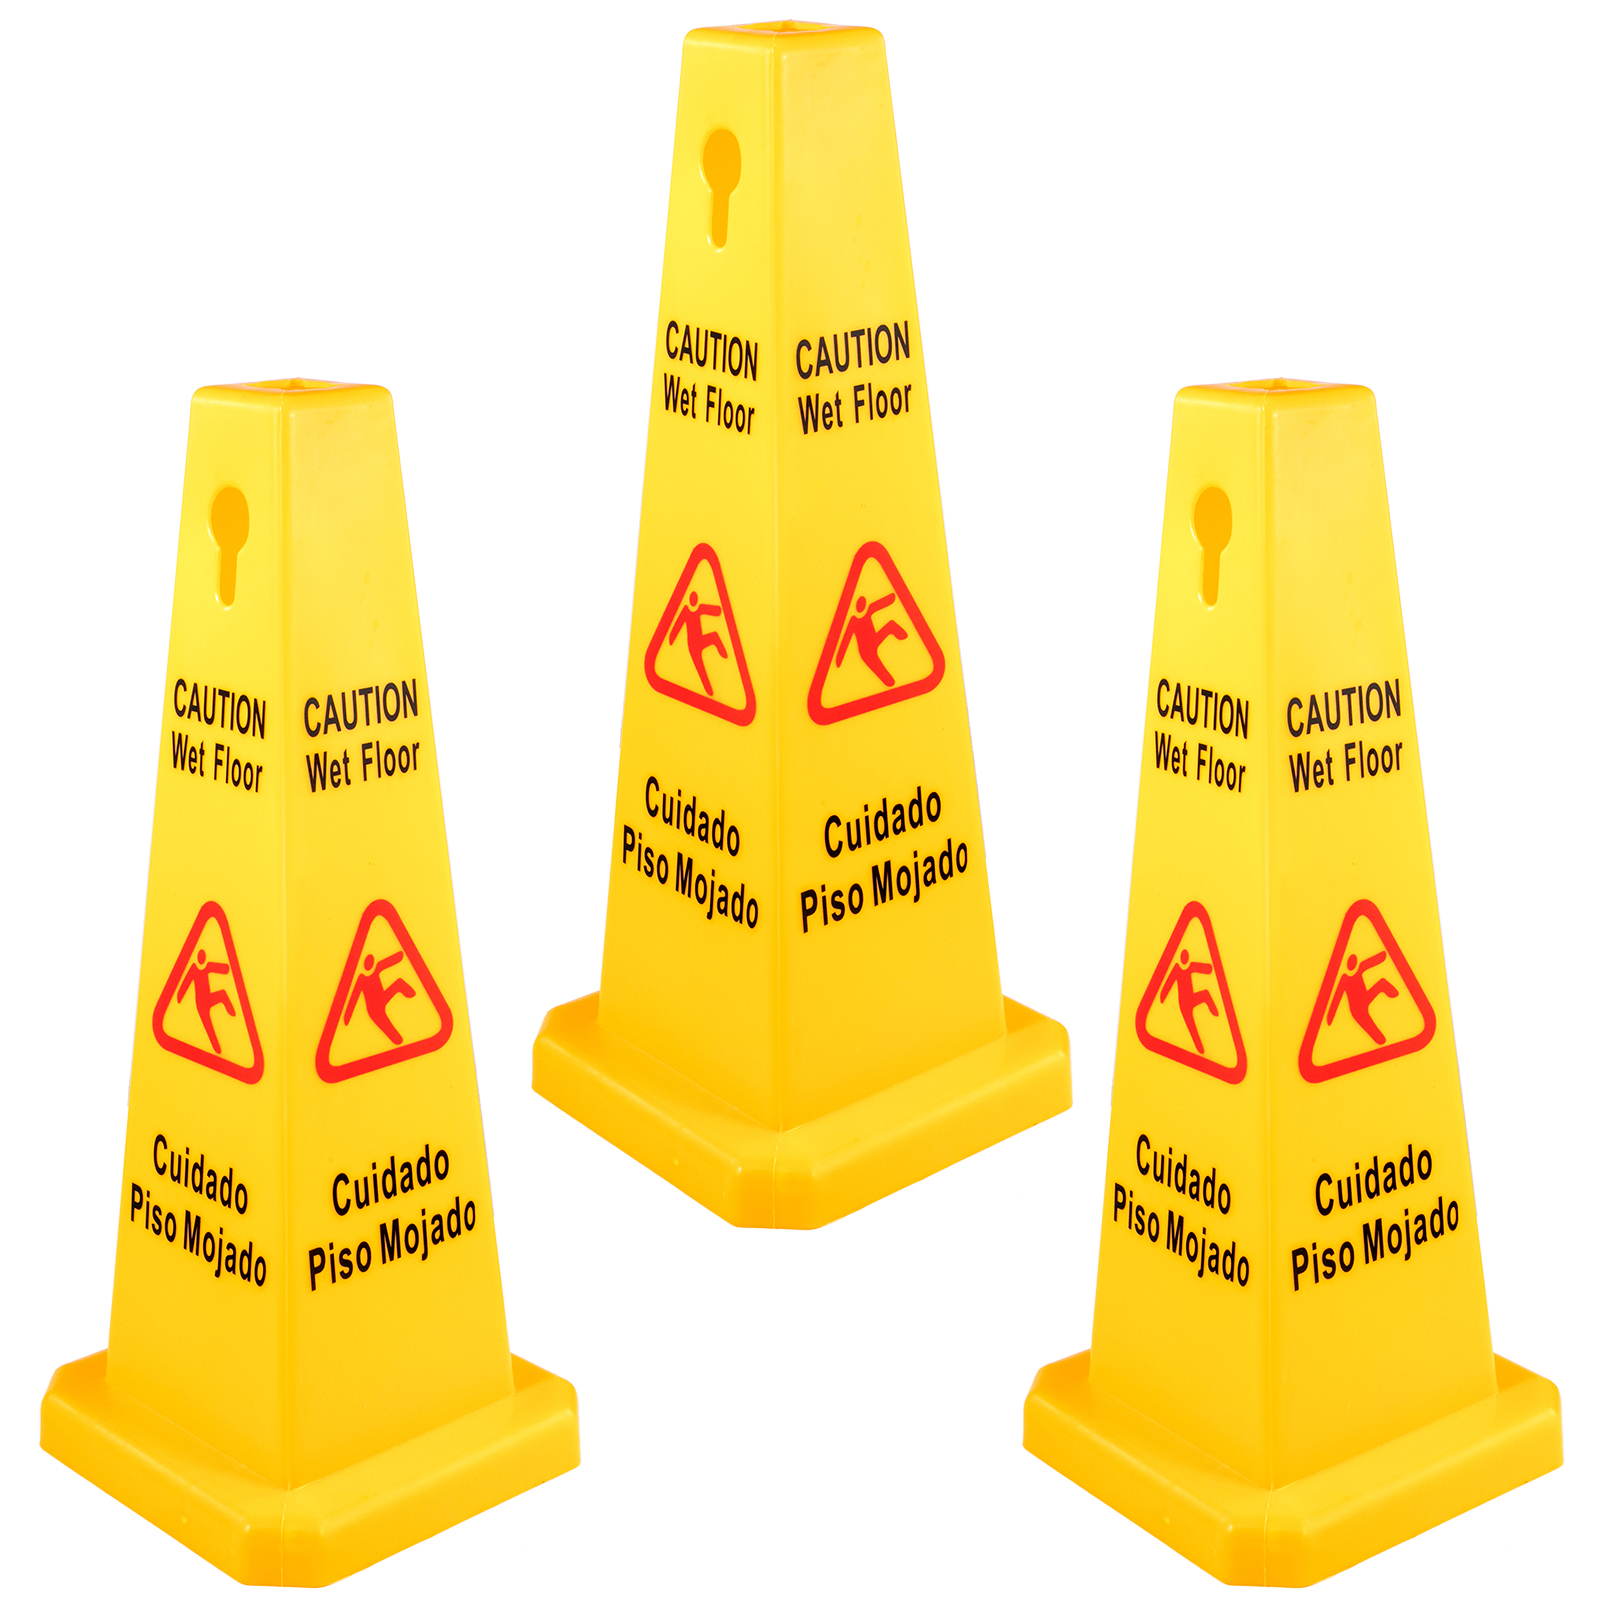 Wet Floor Sign Caution Wet Floor Yellow Floor Wet Sign 4 Sided Cone Sign 3pcs от Vevor Many GEOs